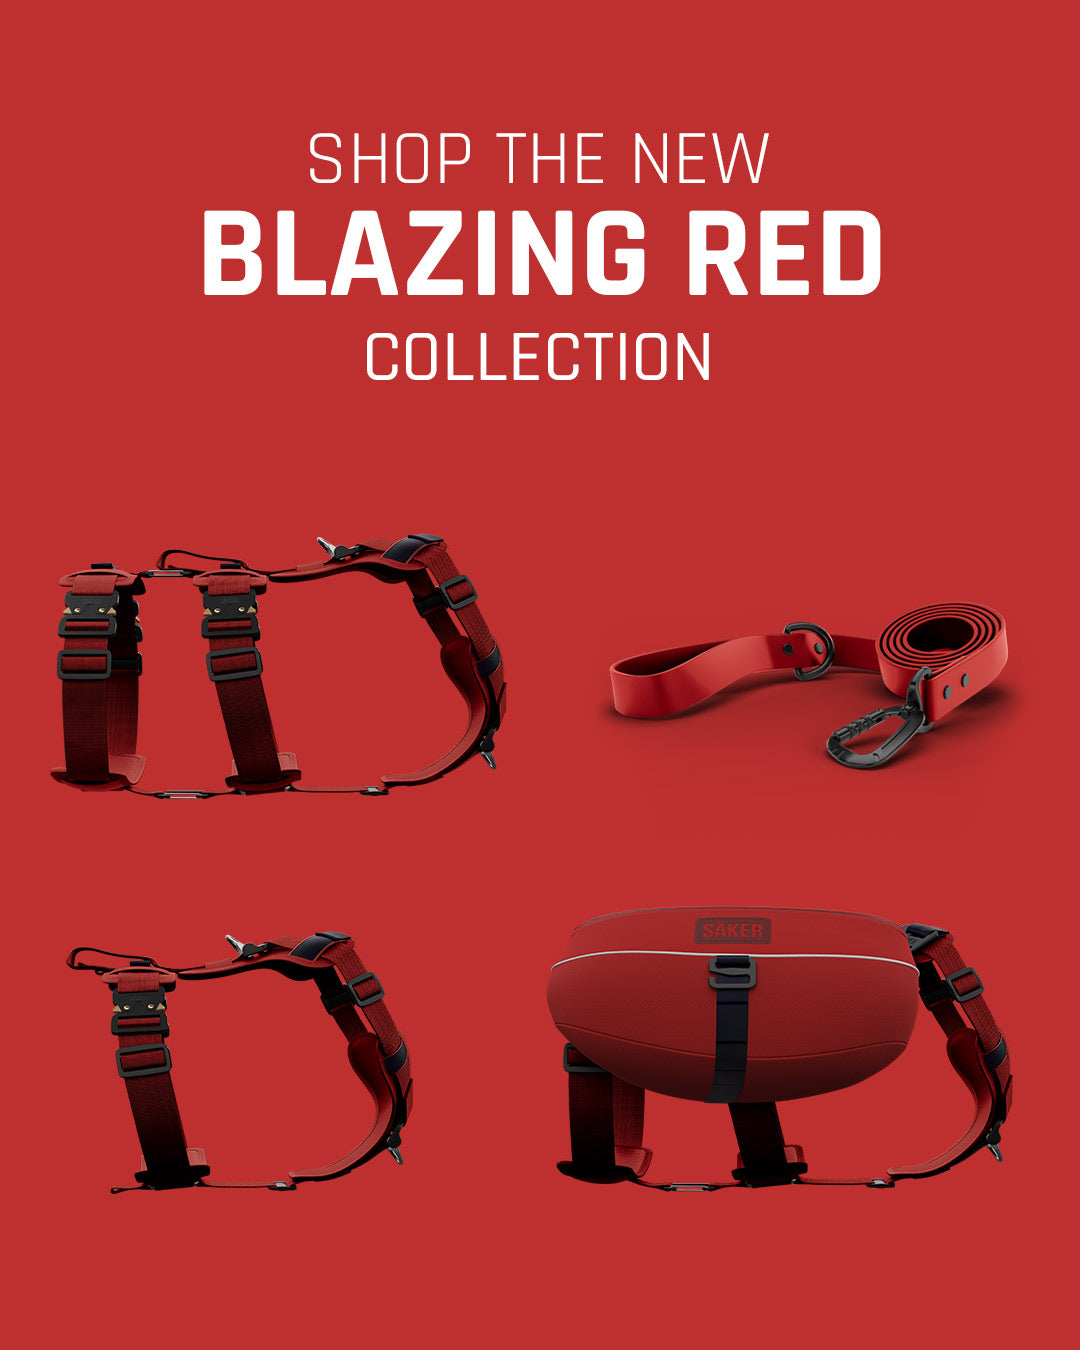 display of the blazing red collection from Saker